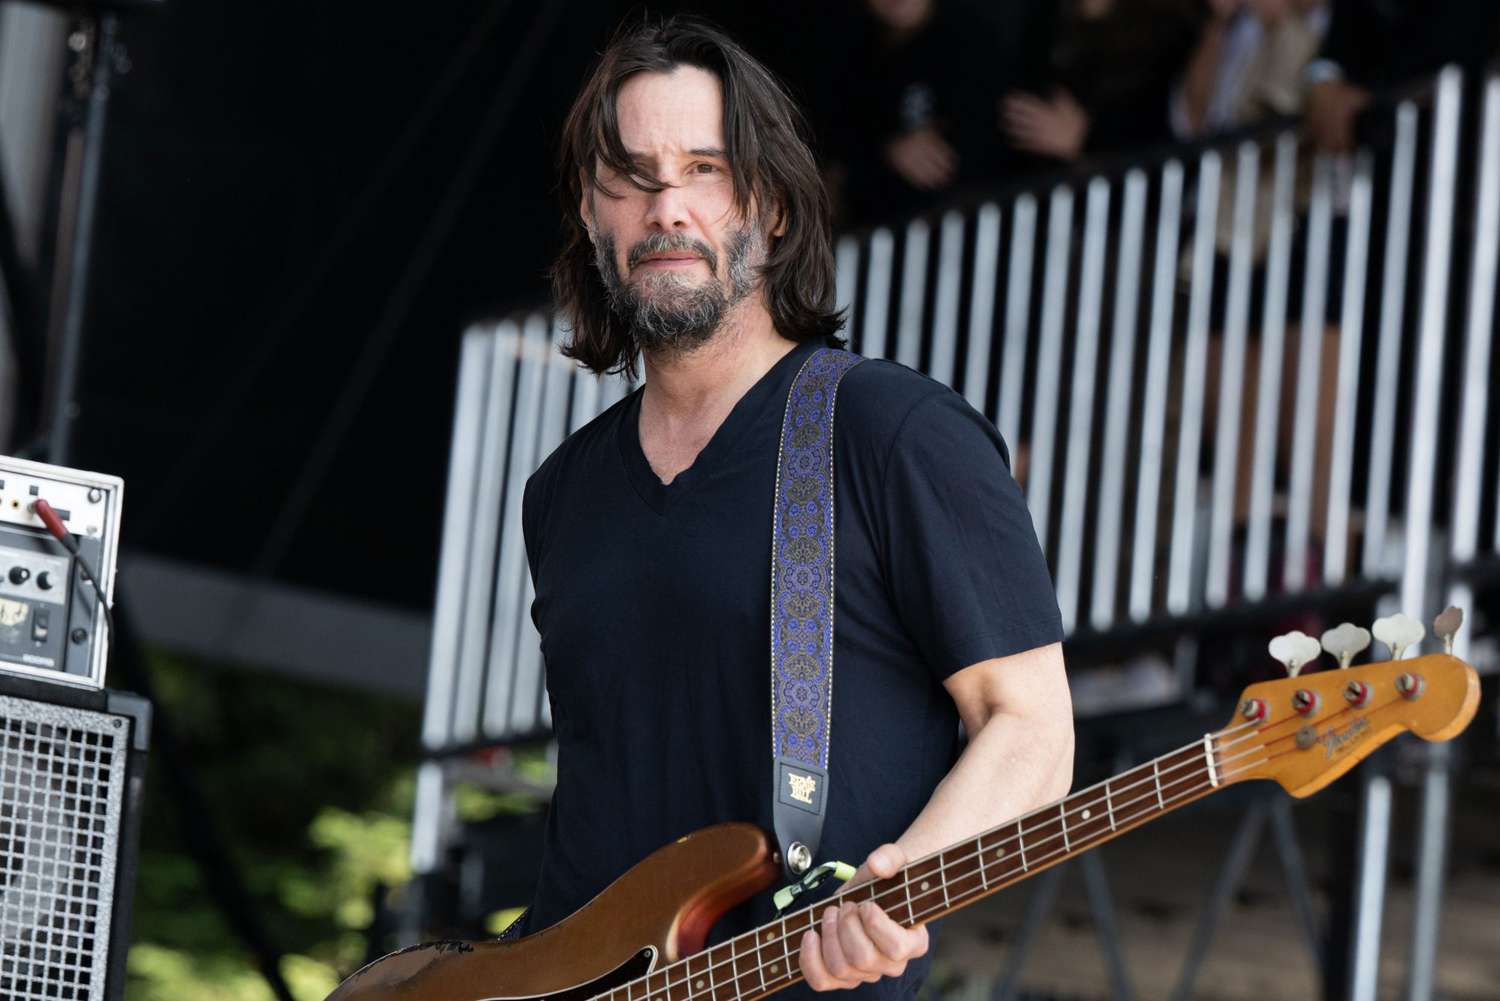 Keanu Reeves performs with Dogstar at the BottleRock Festival in Napa, Calif.